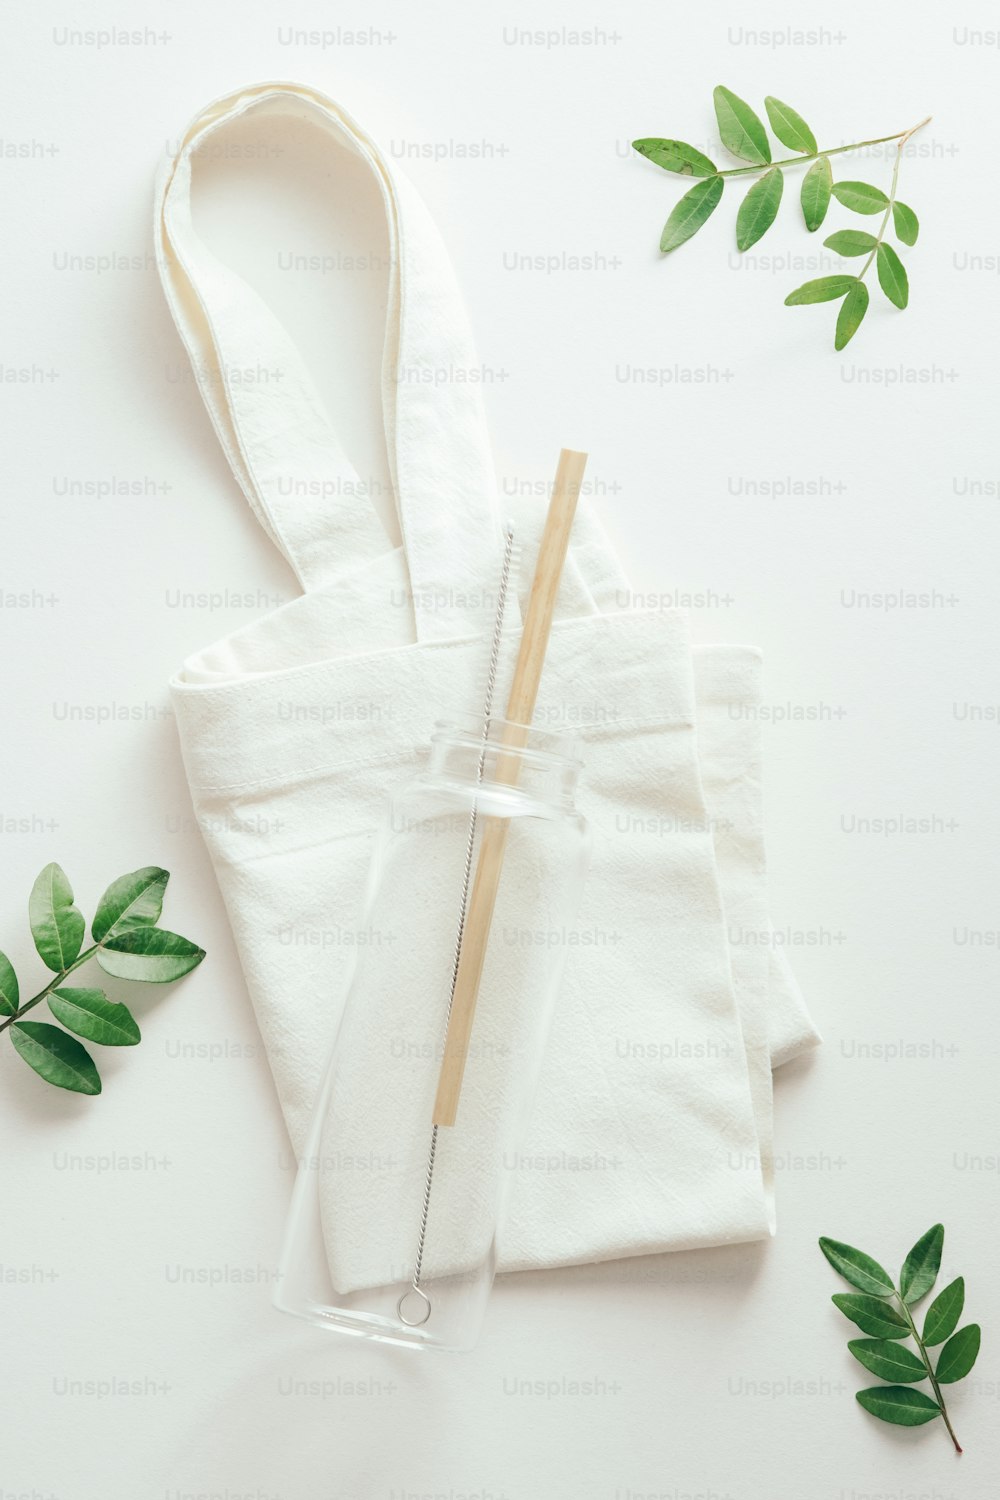 Reusable eco-friendly glass water bottle with bamboo straw on cloth shopping bag with green leaves. Sustainable lifestyle concept.